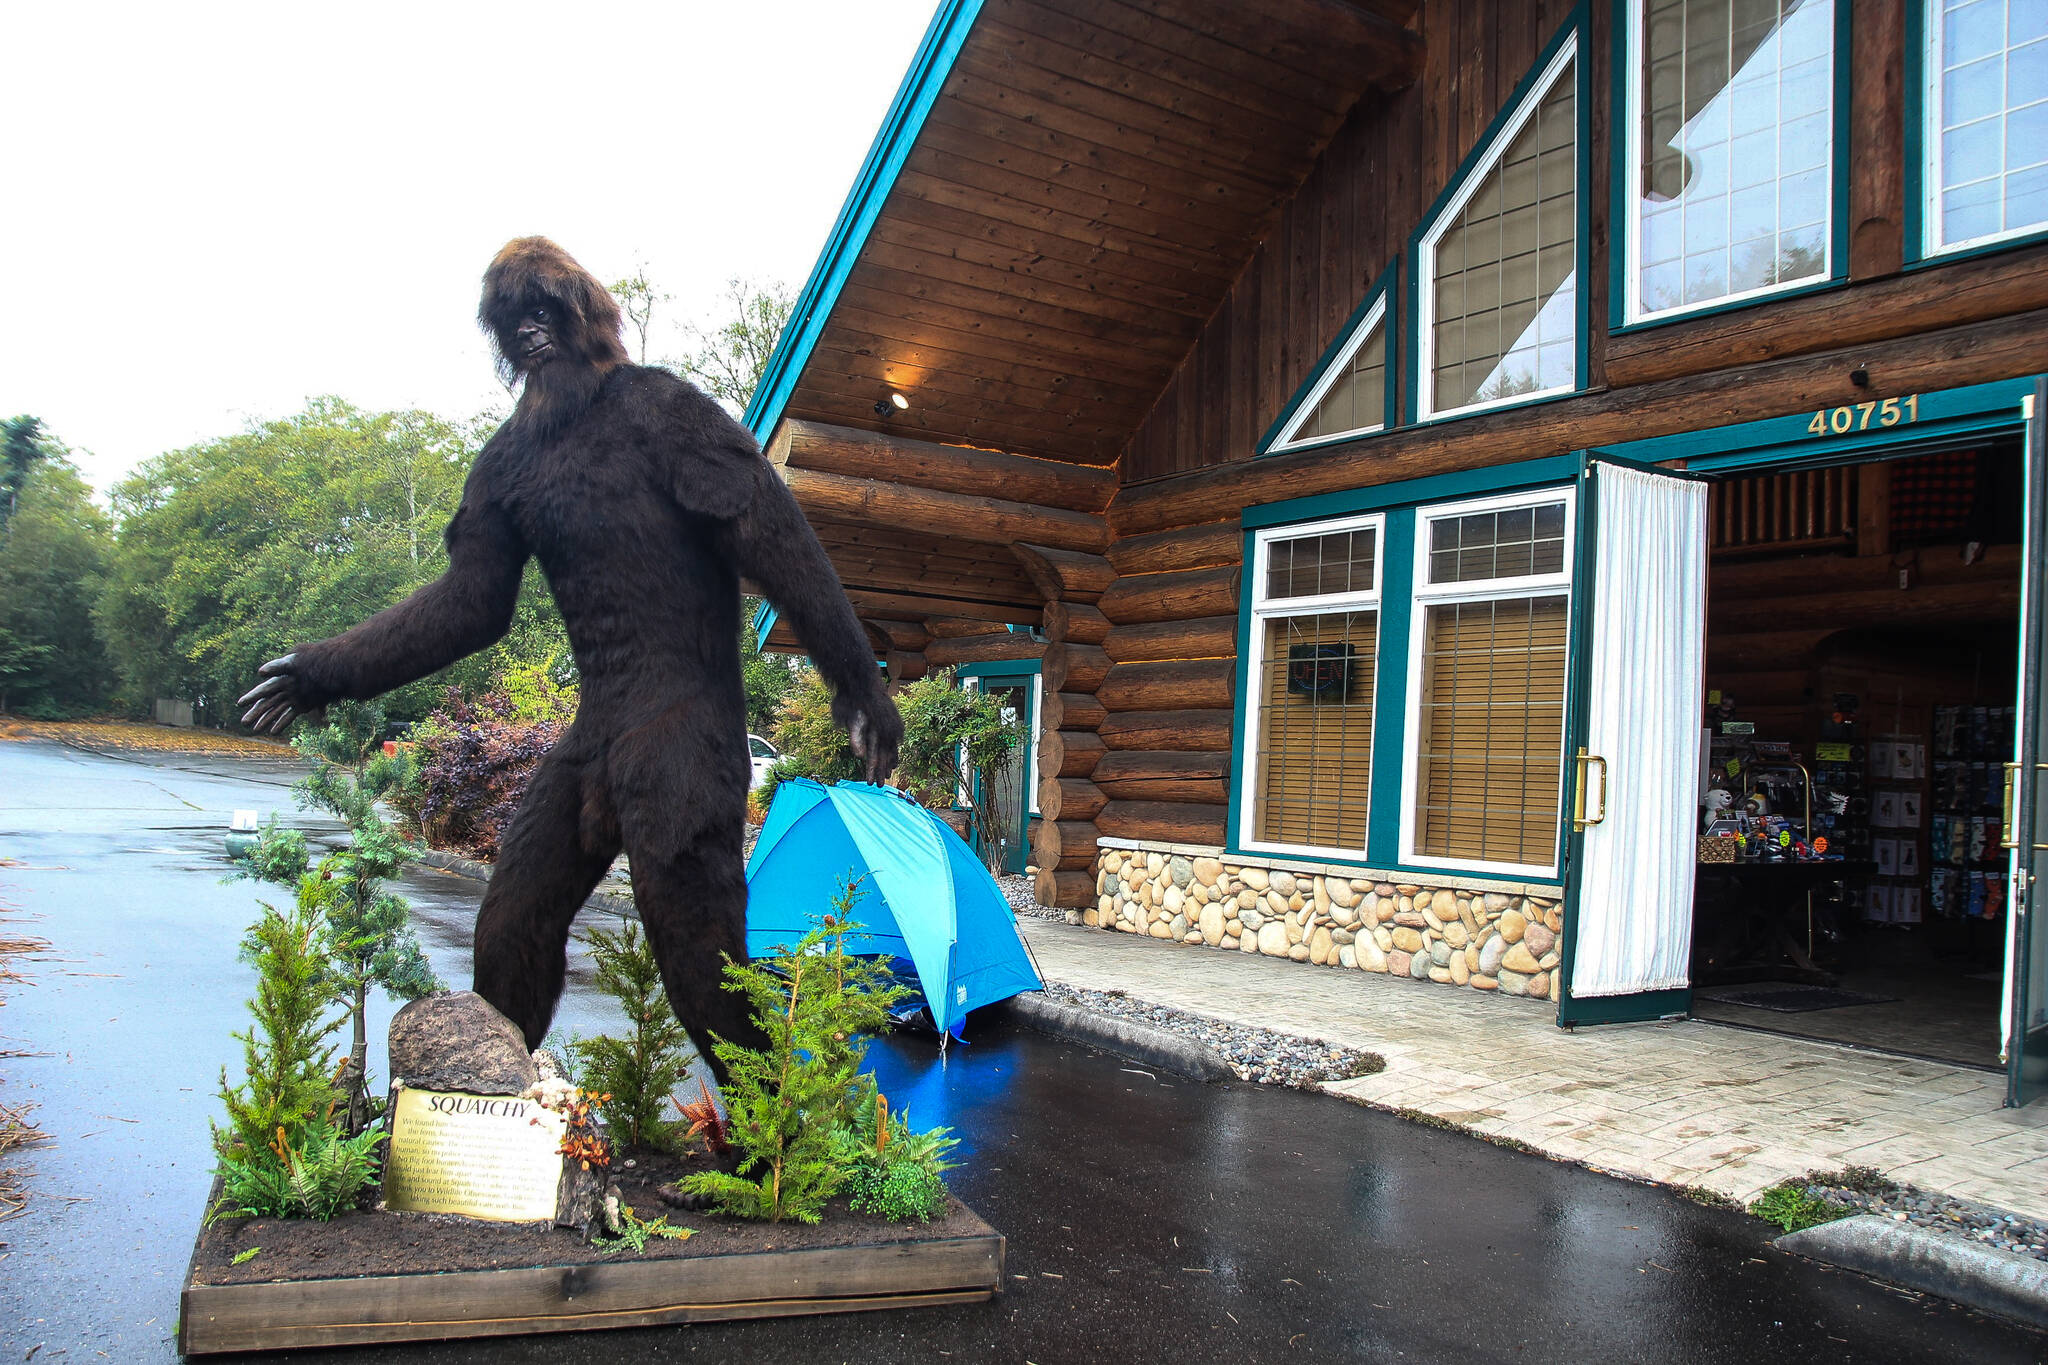 Squatchy stands in front of Squatchy’s. (Photo by Luisa Loi/Whidbey News-Times)